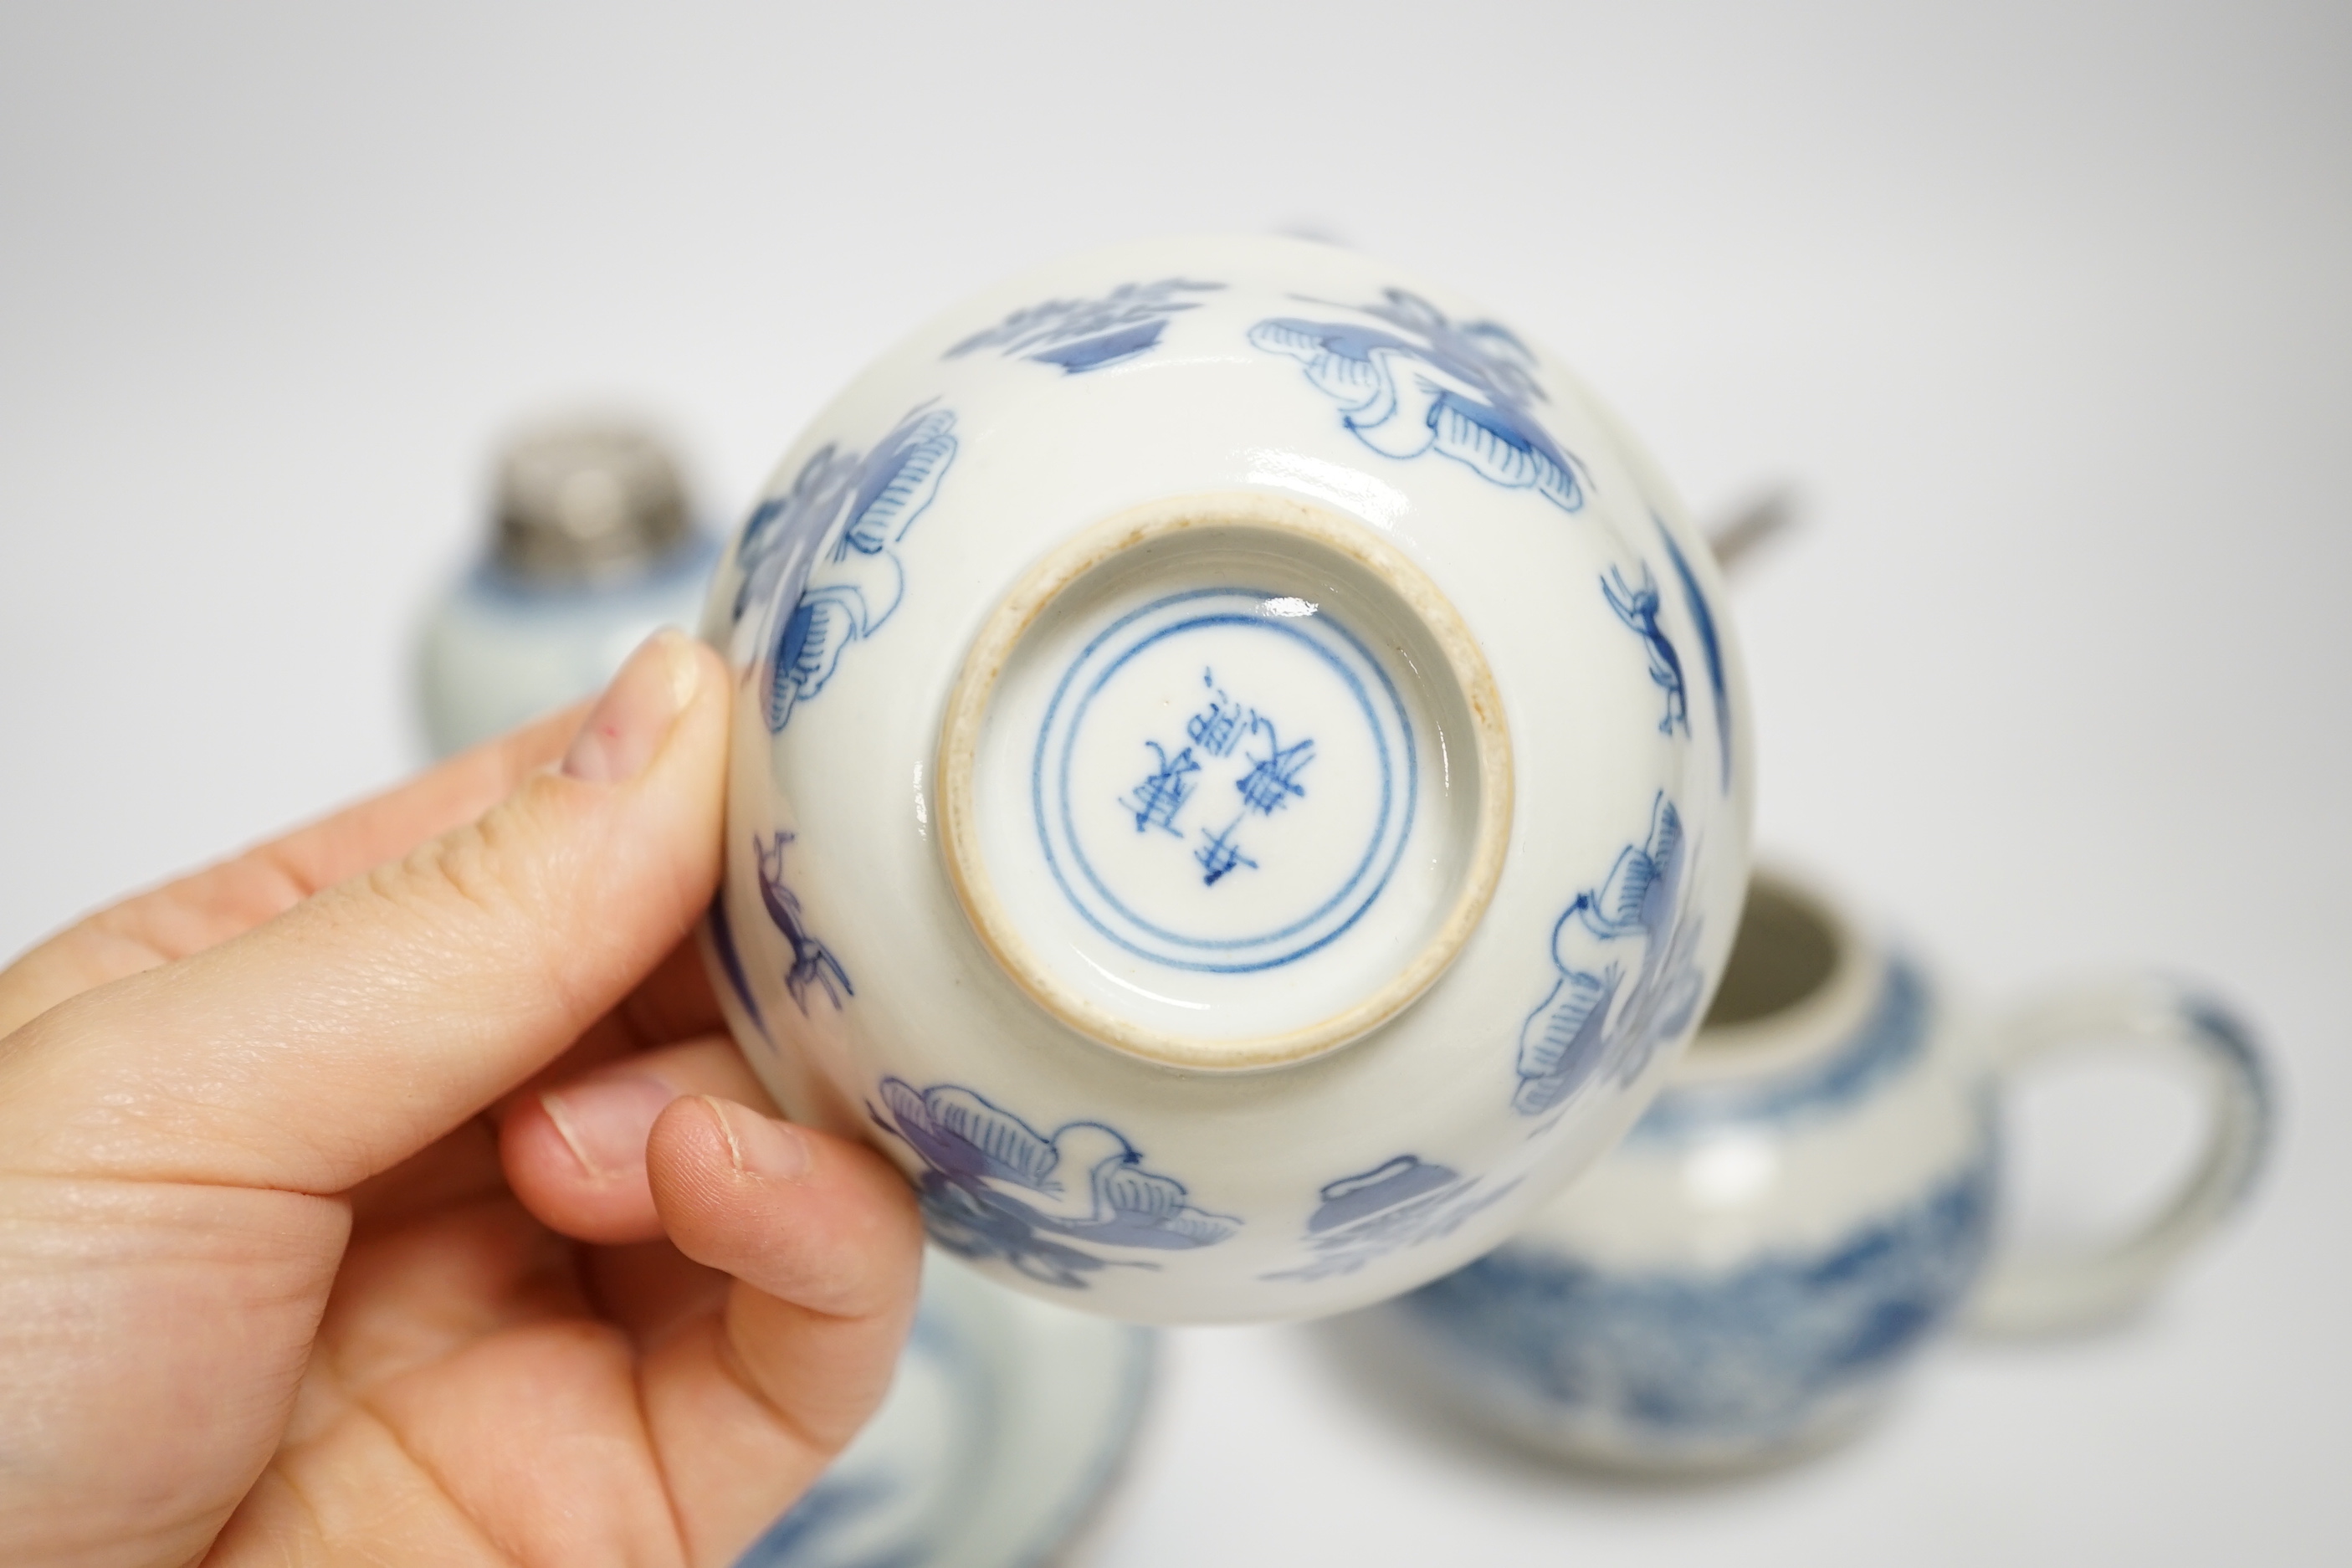 18th / 19th century Chinese export porcelain: two teapots, a tea canister, a plate and a teabowl, - Image 5 of 9